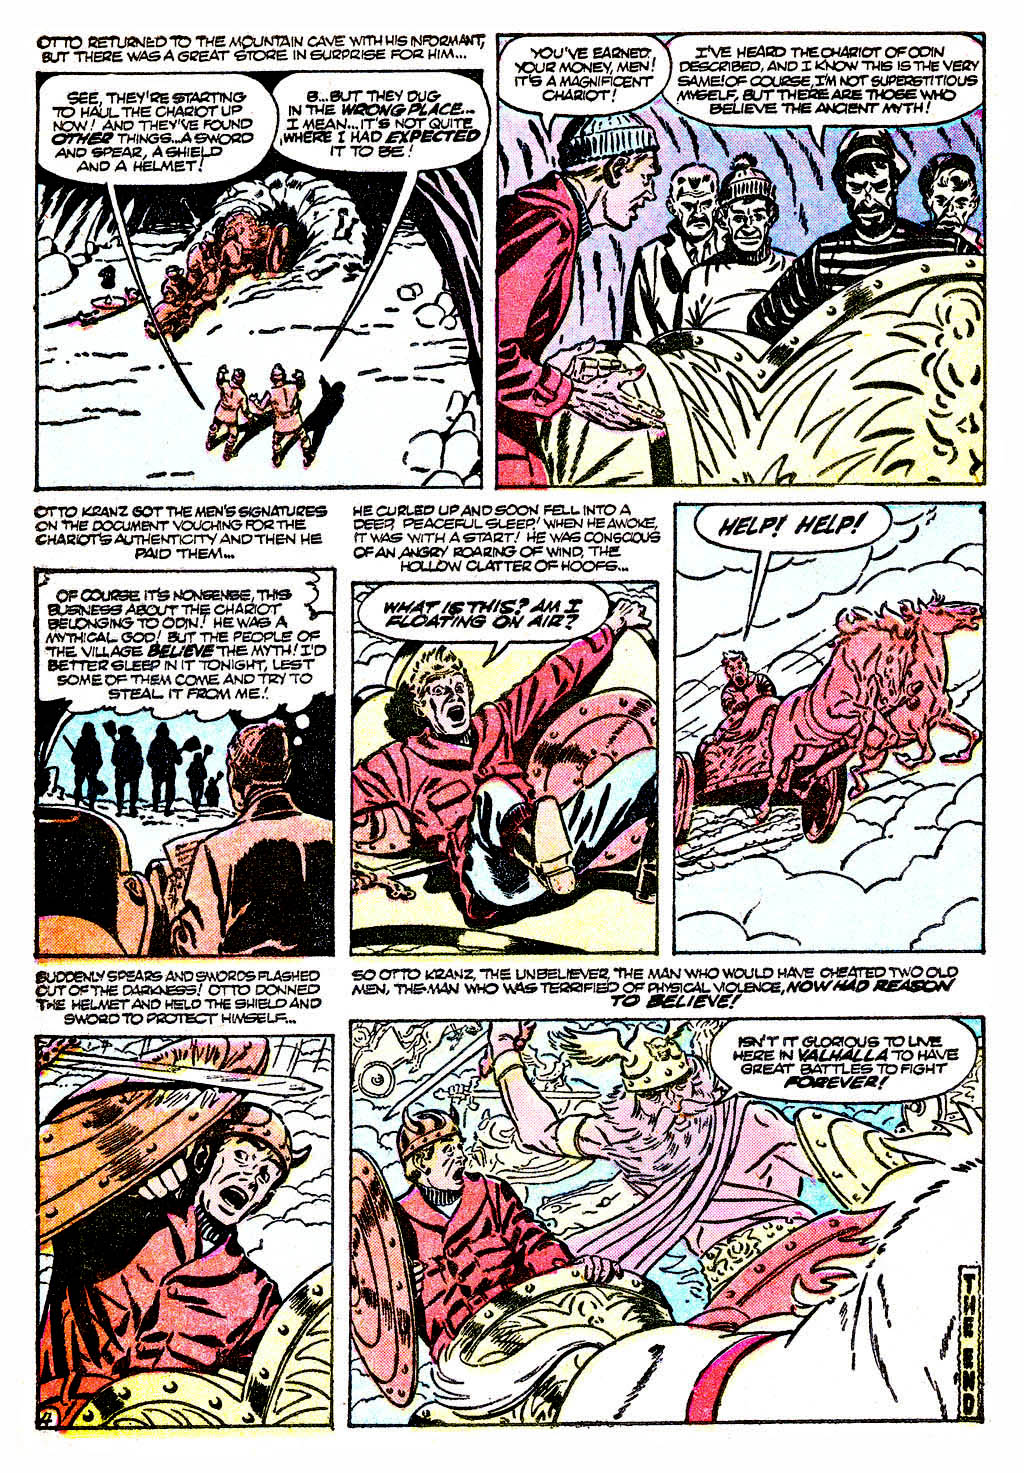 Journey Into Mystery (1952) 47 Page 11